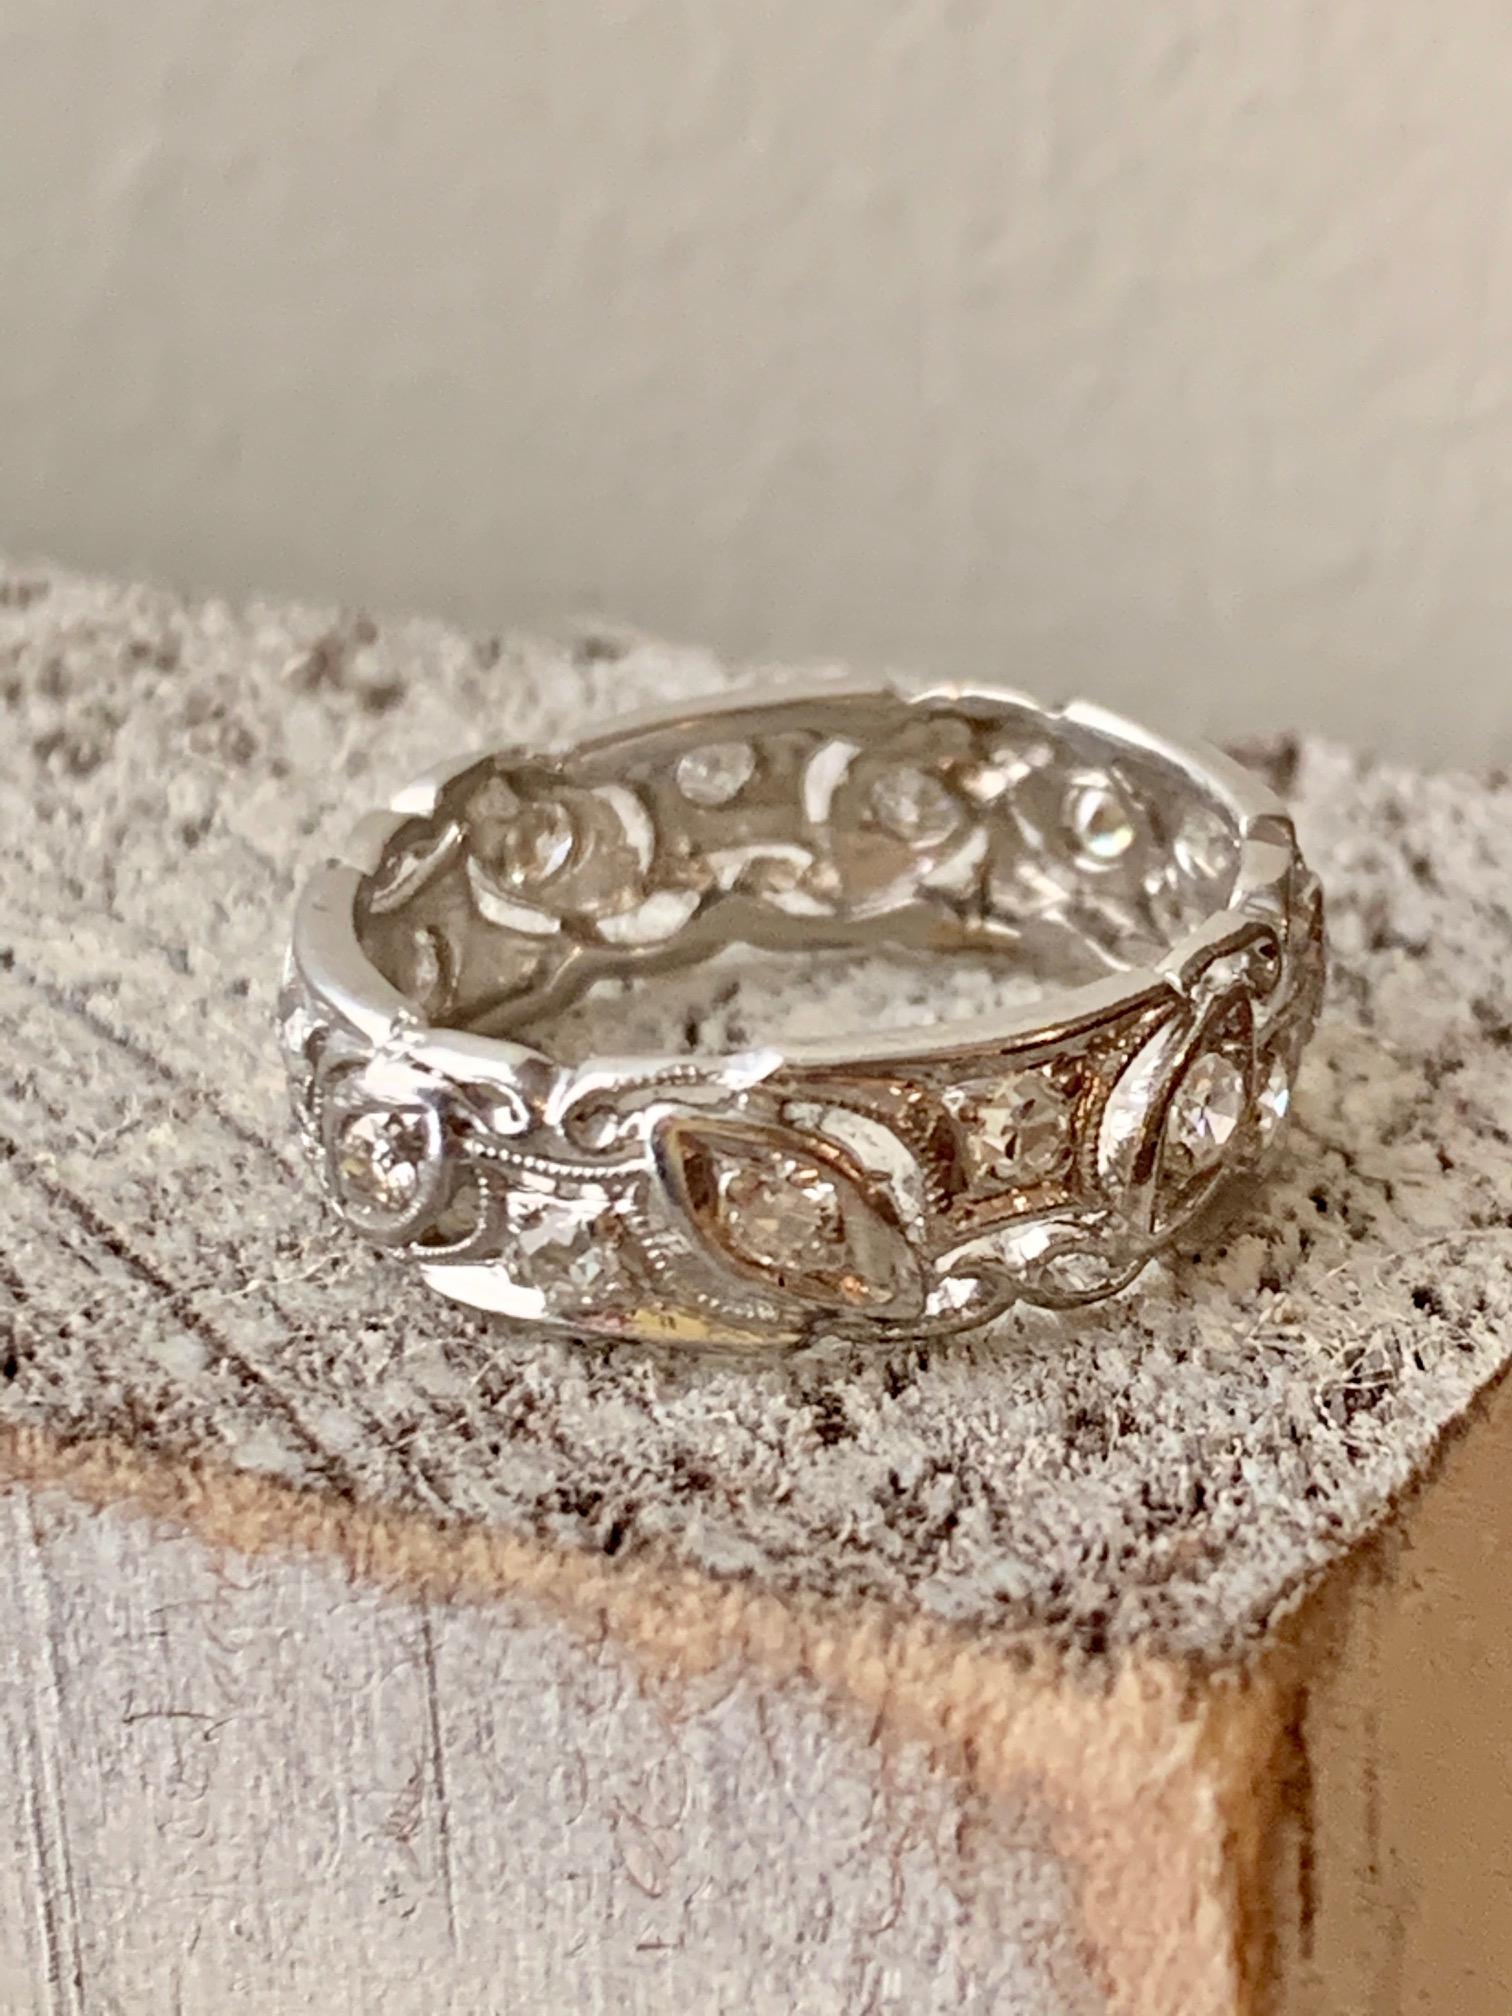 This wedding or anniversary eternity band is simple, but makes a bold statement.  

The ring has:
15 Single cut and European cut Diamonds - approximately .60 ctw with average grades of SI-G.

Size: 6

Weight: 3.9 grams

This ring is in excellent